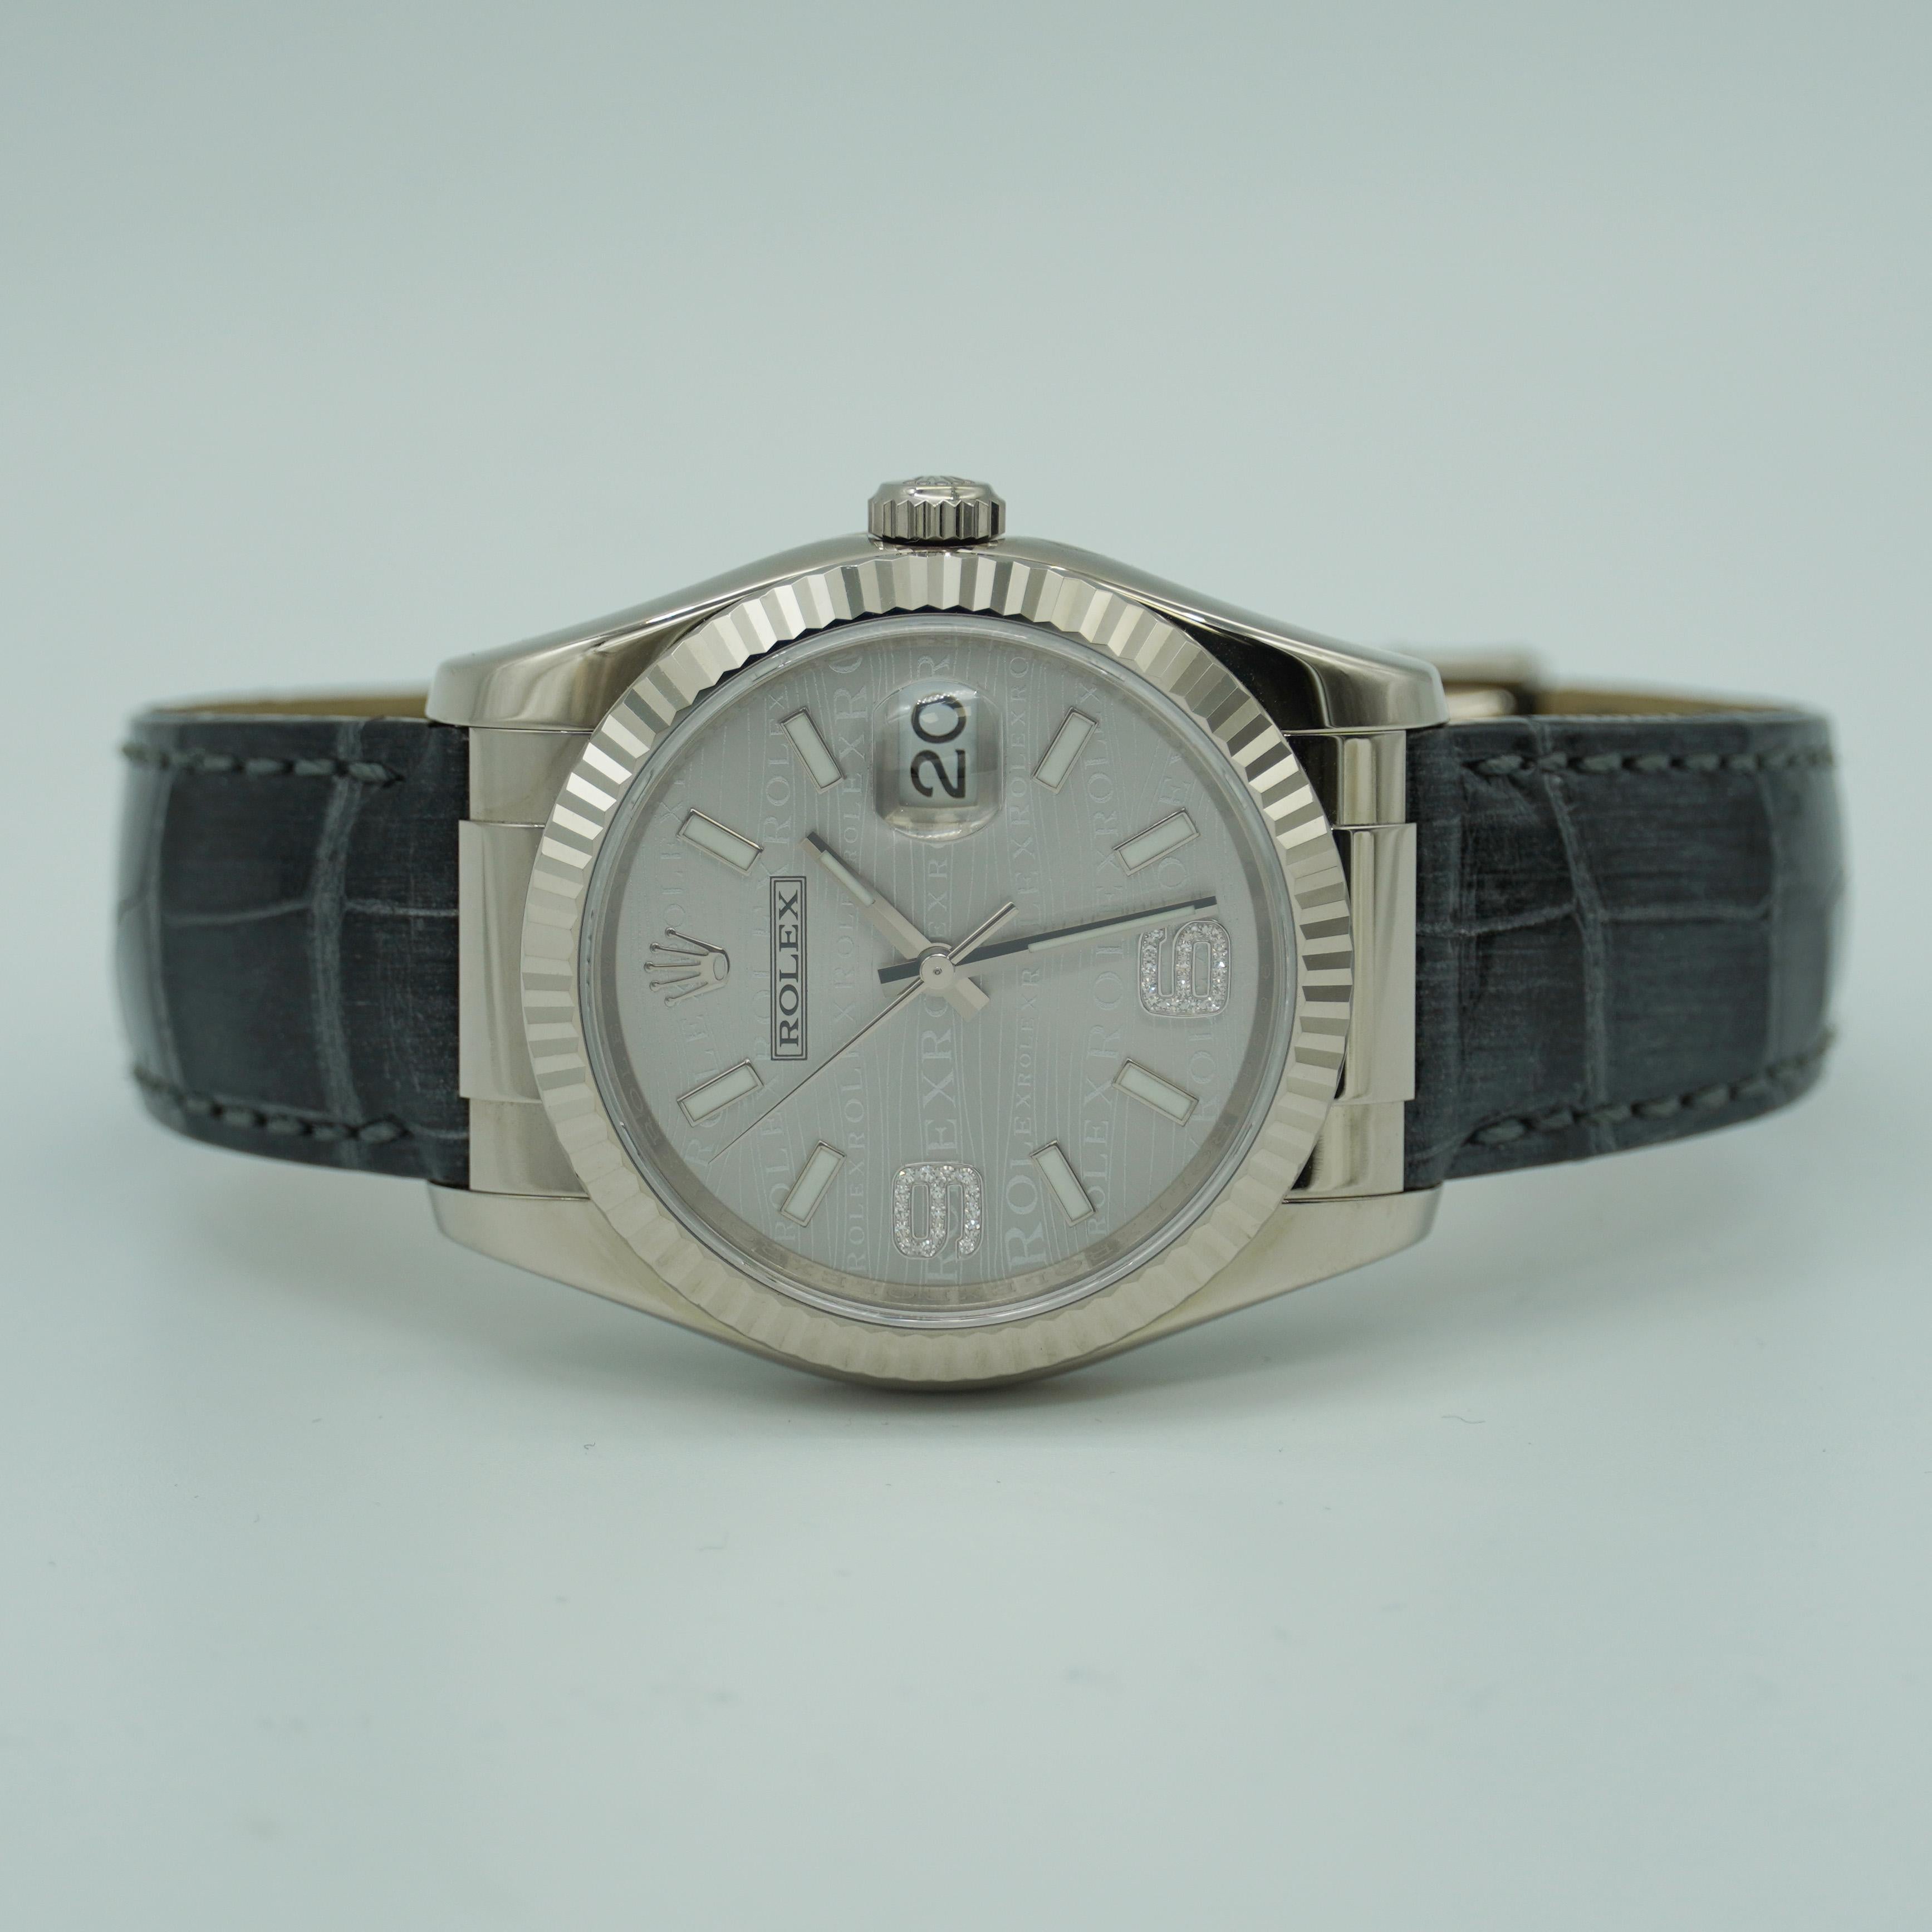 Round Cut Rolex Datejust 36 Oyster Perpetual Datejust White Wave Dial REF: 116139 For Sale